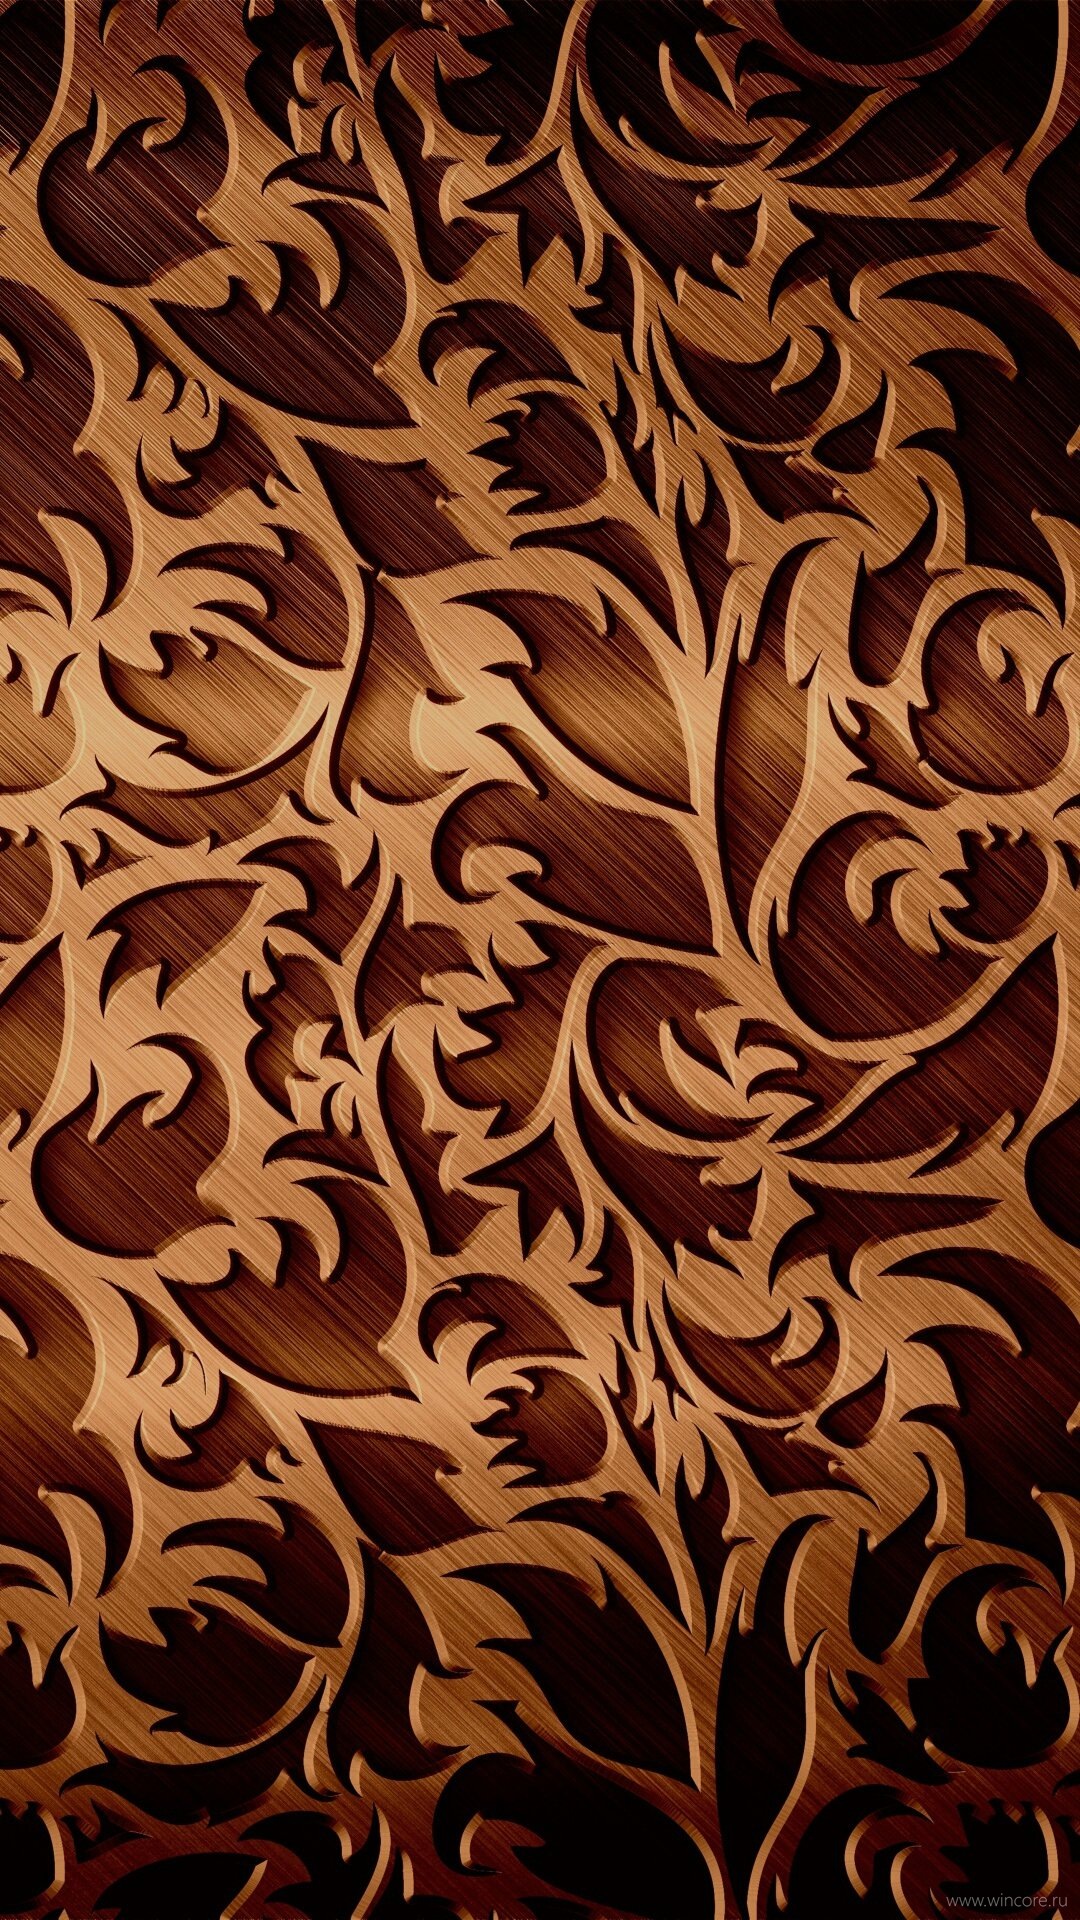 Brown and White Floral Textile. Wallpaper in 1080x1920 Resolution